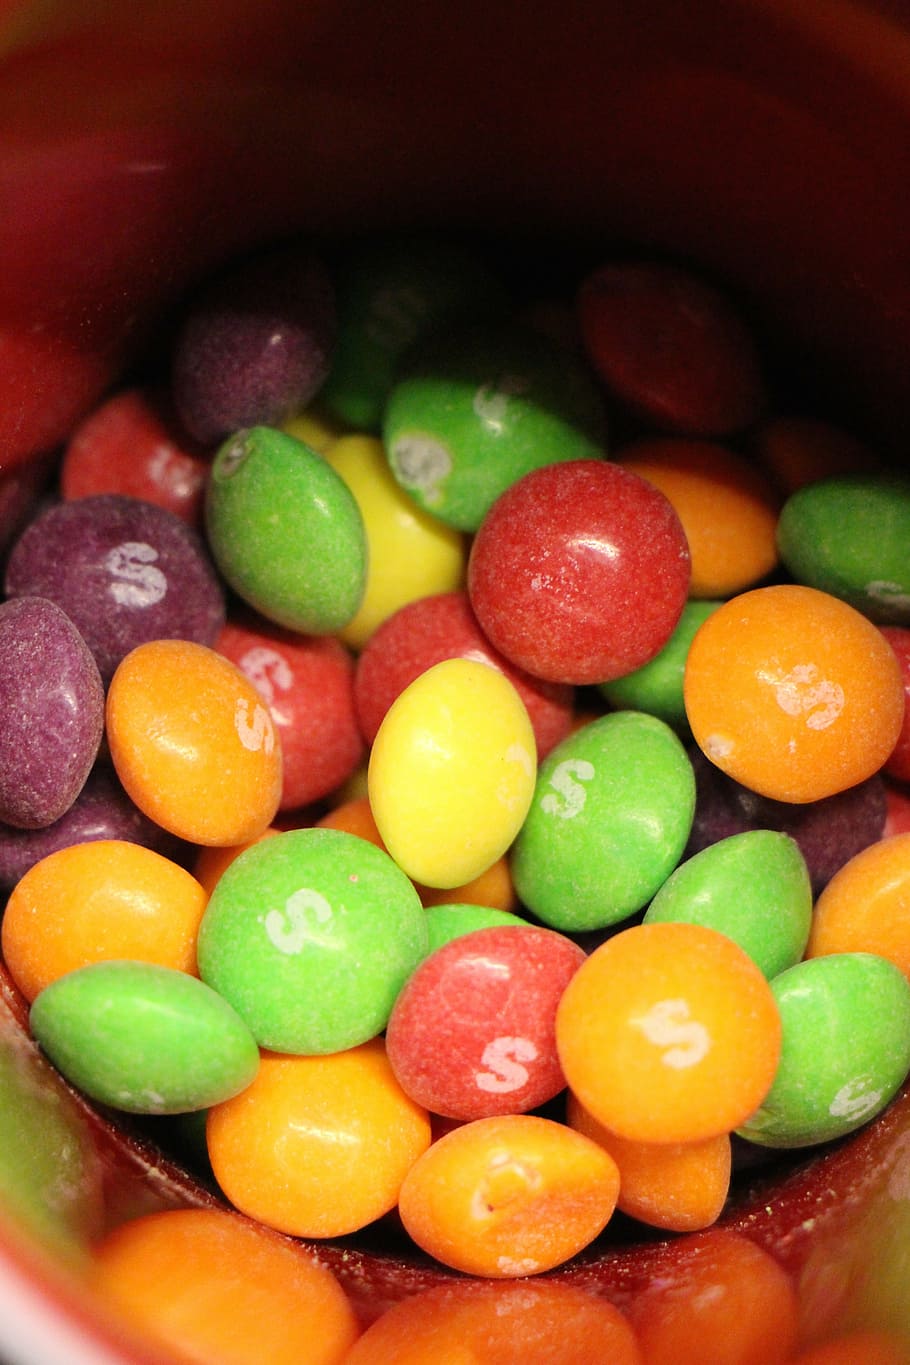 smarties, candy, colorful, chocolate lentils, food, food and drink, sweet food, sweet, freshness, multi colored